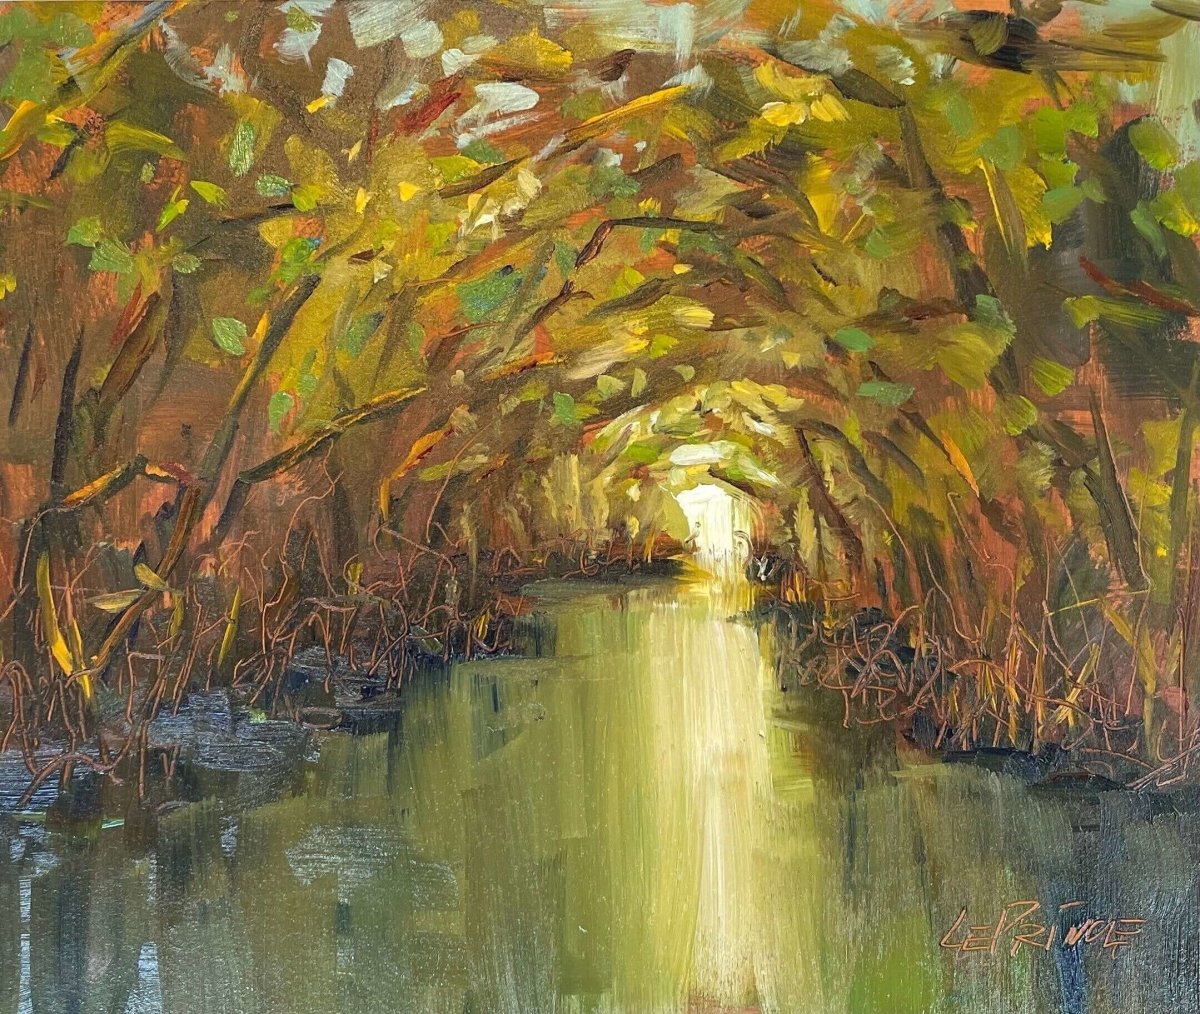 Mangrove Study by Kevin LePrince at LePrince Galleries